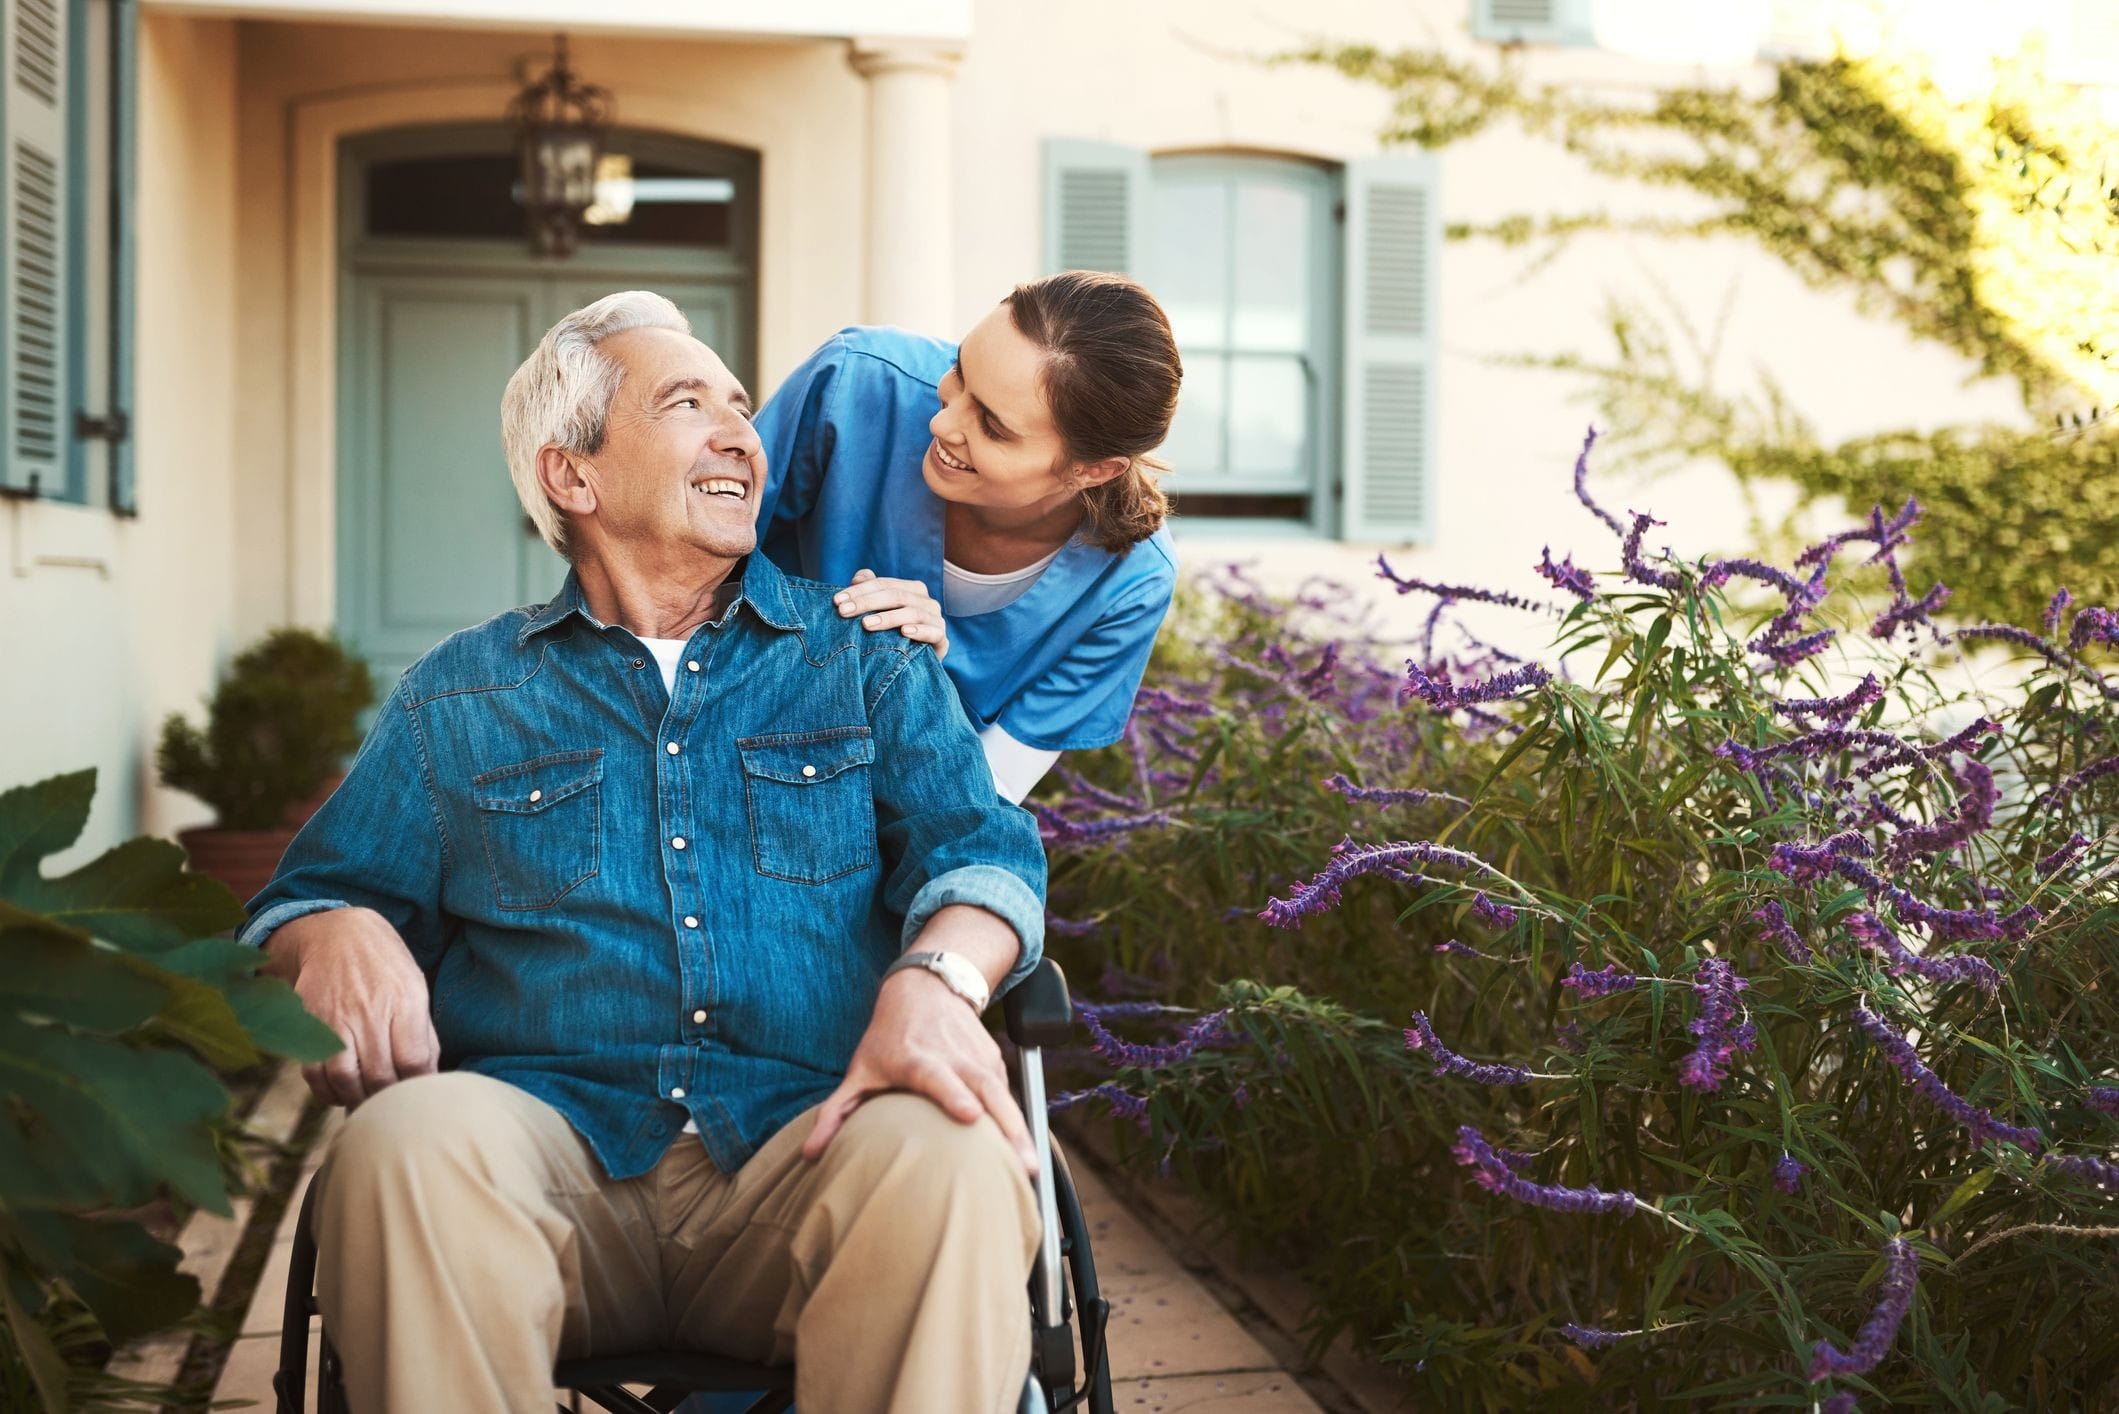 Home Care Services - Transportation - Cleaning Services - Social Support - Personal Care - Meal Prep - Gardening - Respite